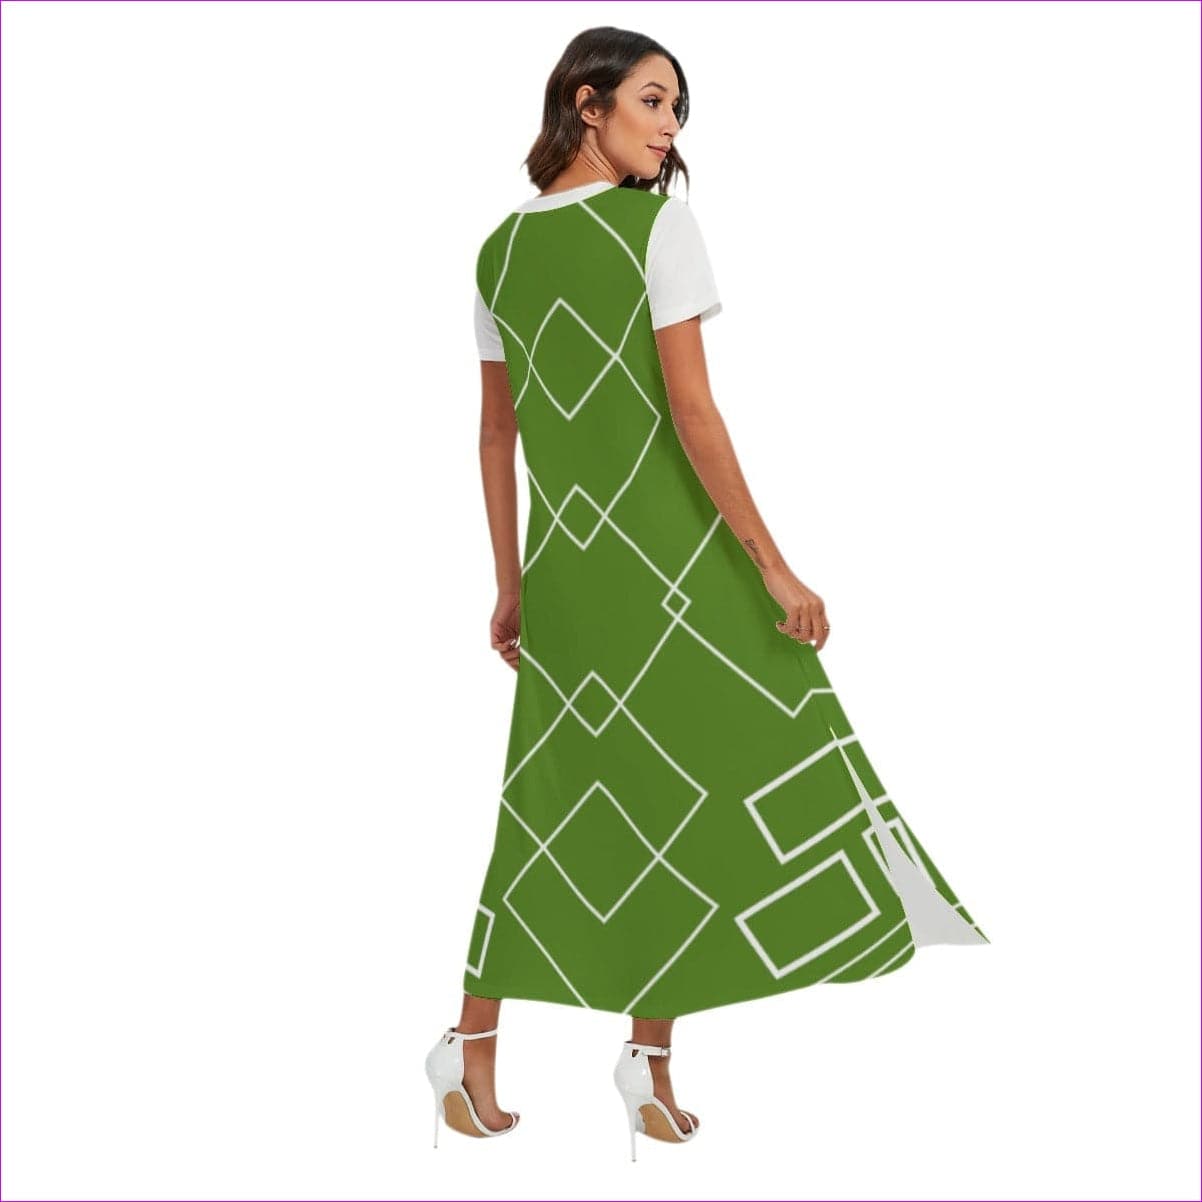 Shaped Out Women's Green V-neck Dress With Short Sleeve - women's dress at TFC&H Co.